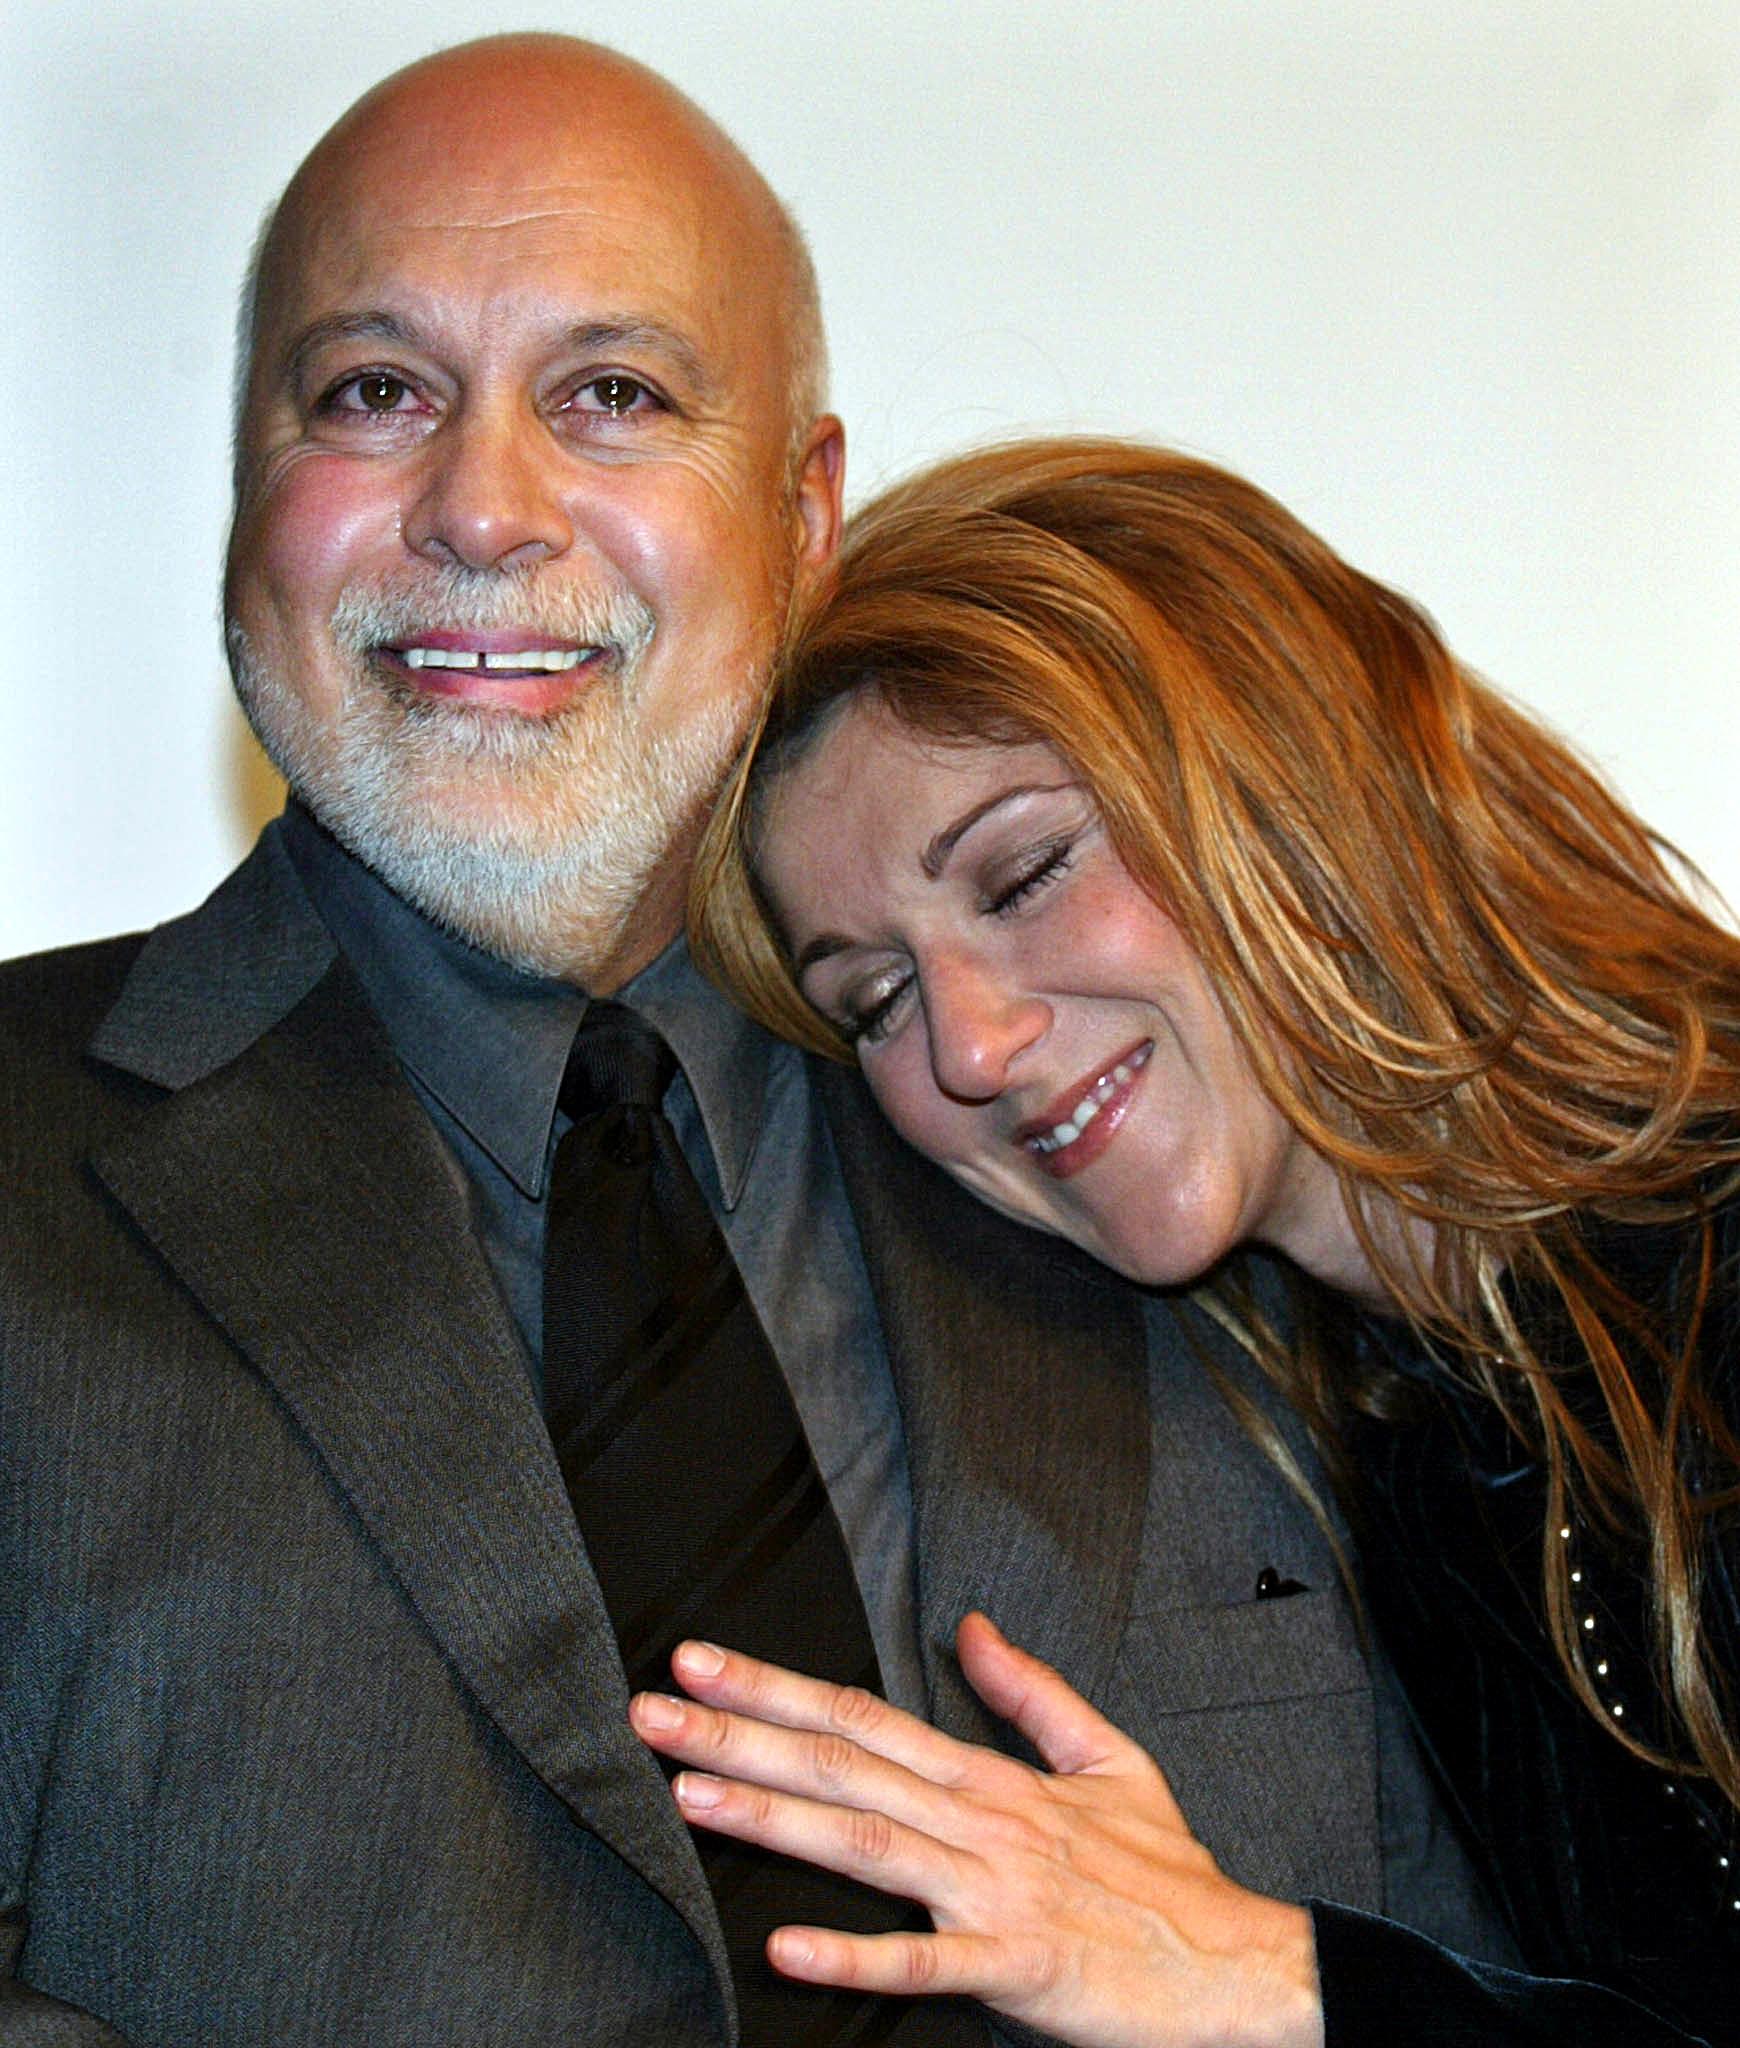 Rene Angelil and wife, Celine Dion, attend a news conference at Sainte-Justine Children's Hospital in Montreal, Canada, 18 December, 2002 | Source: Getty Images